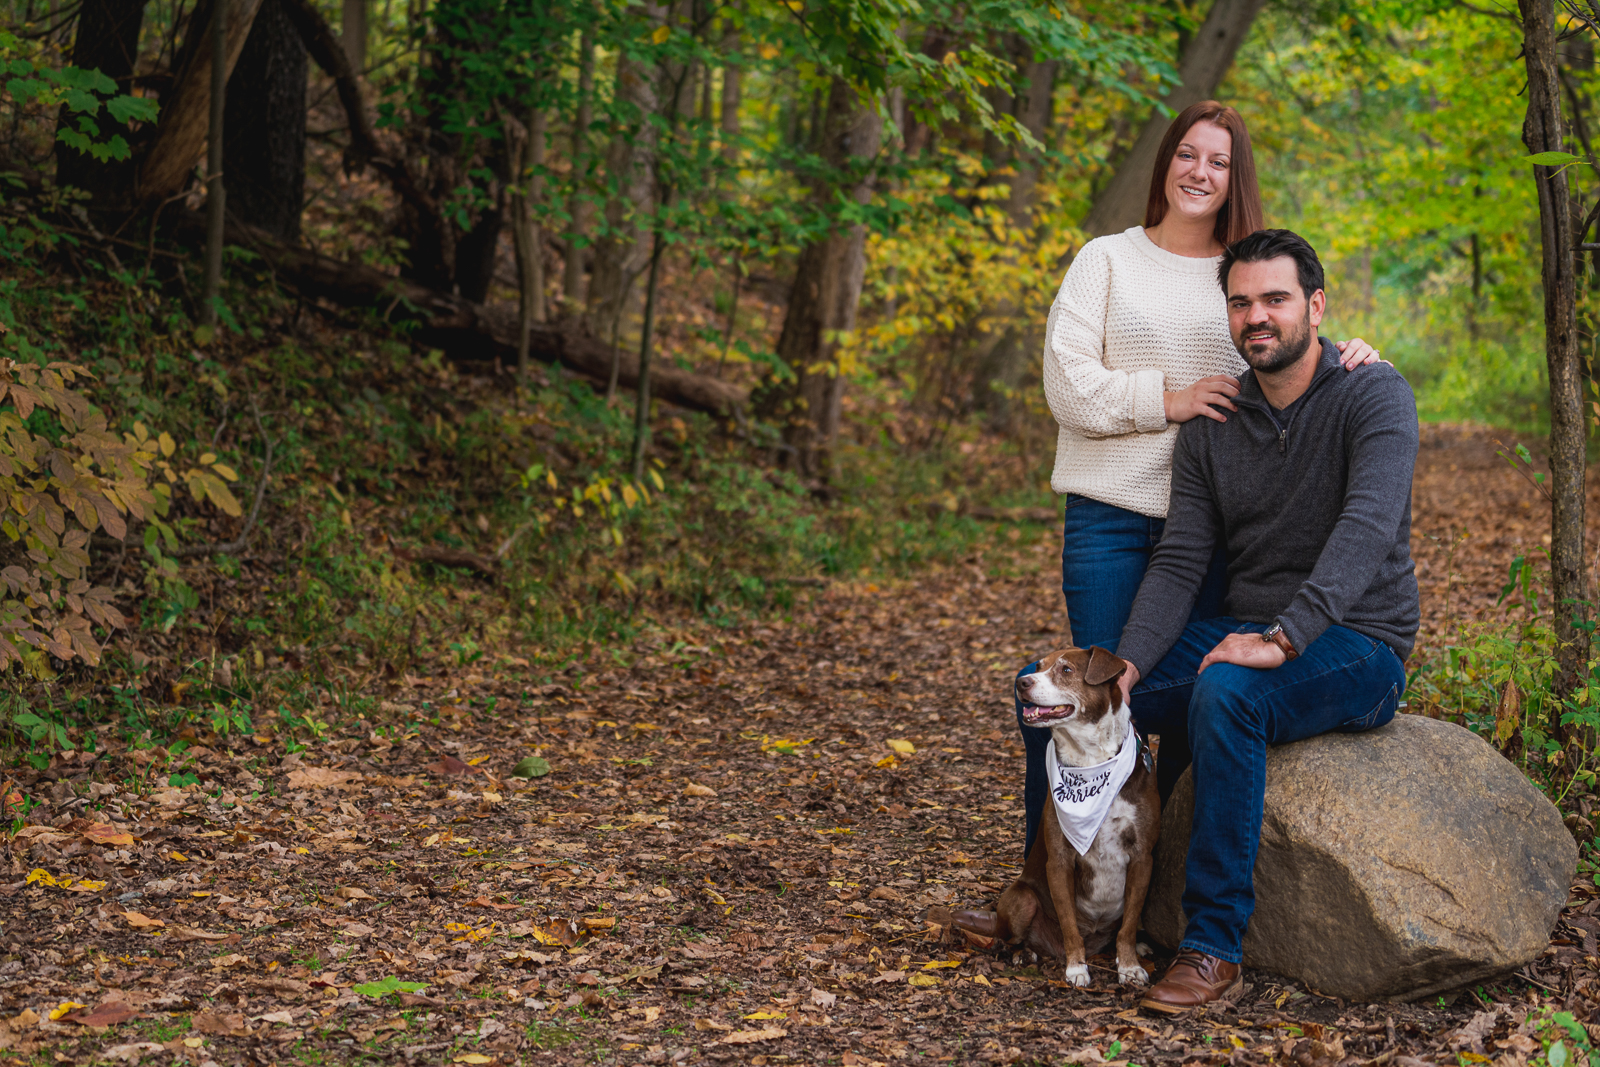 Man and woman fiancee engagement photo with dog, smile, cute dog, dog bandana, outdoor, nature, forest, fall leaves, fall colors, outdoor fall engagement photo session at Tinkers Creek, Bedford Reservation, Cleveland Metroparks